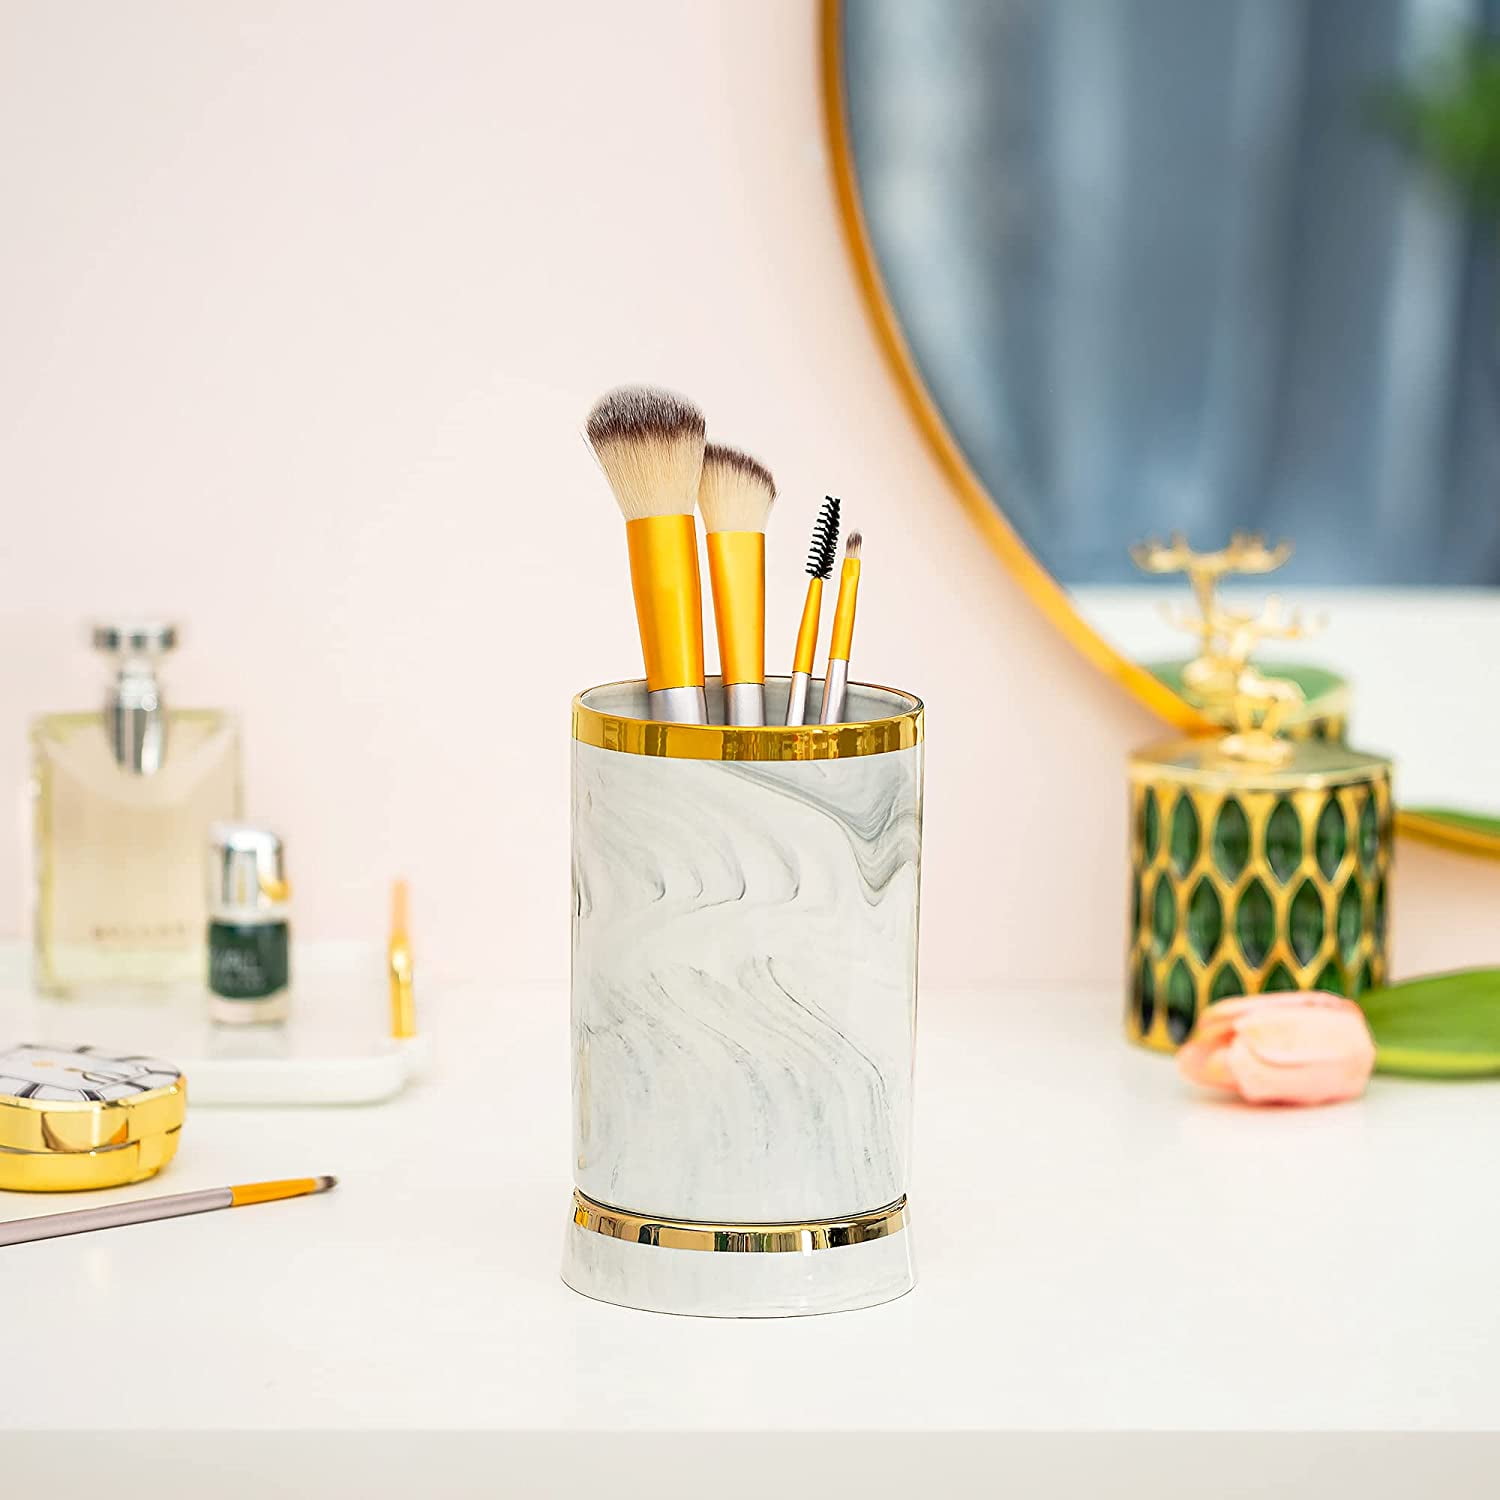 Super Sales! Inspire Me! Home Decor White Ceramic Utensil Holder With Gold  Textured Details & Base  From Pops Of Color Home Collection, Free  Shipping